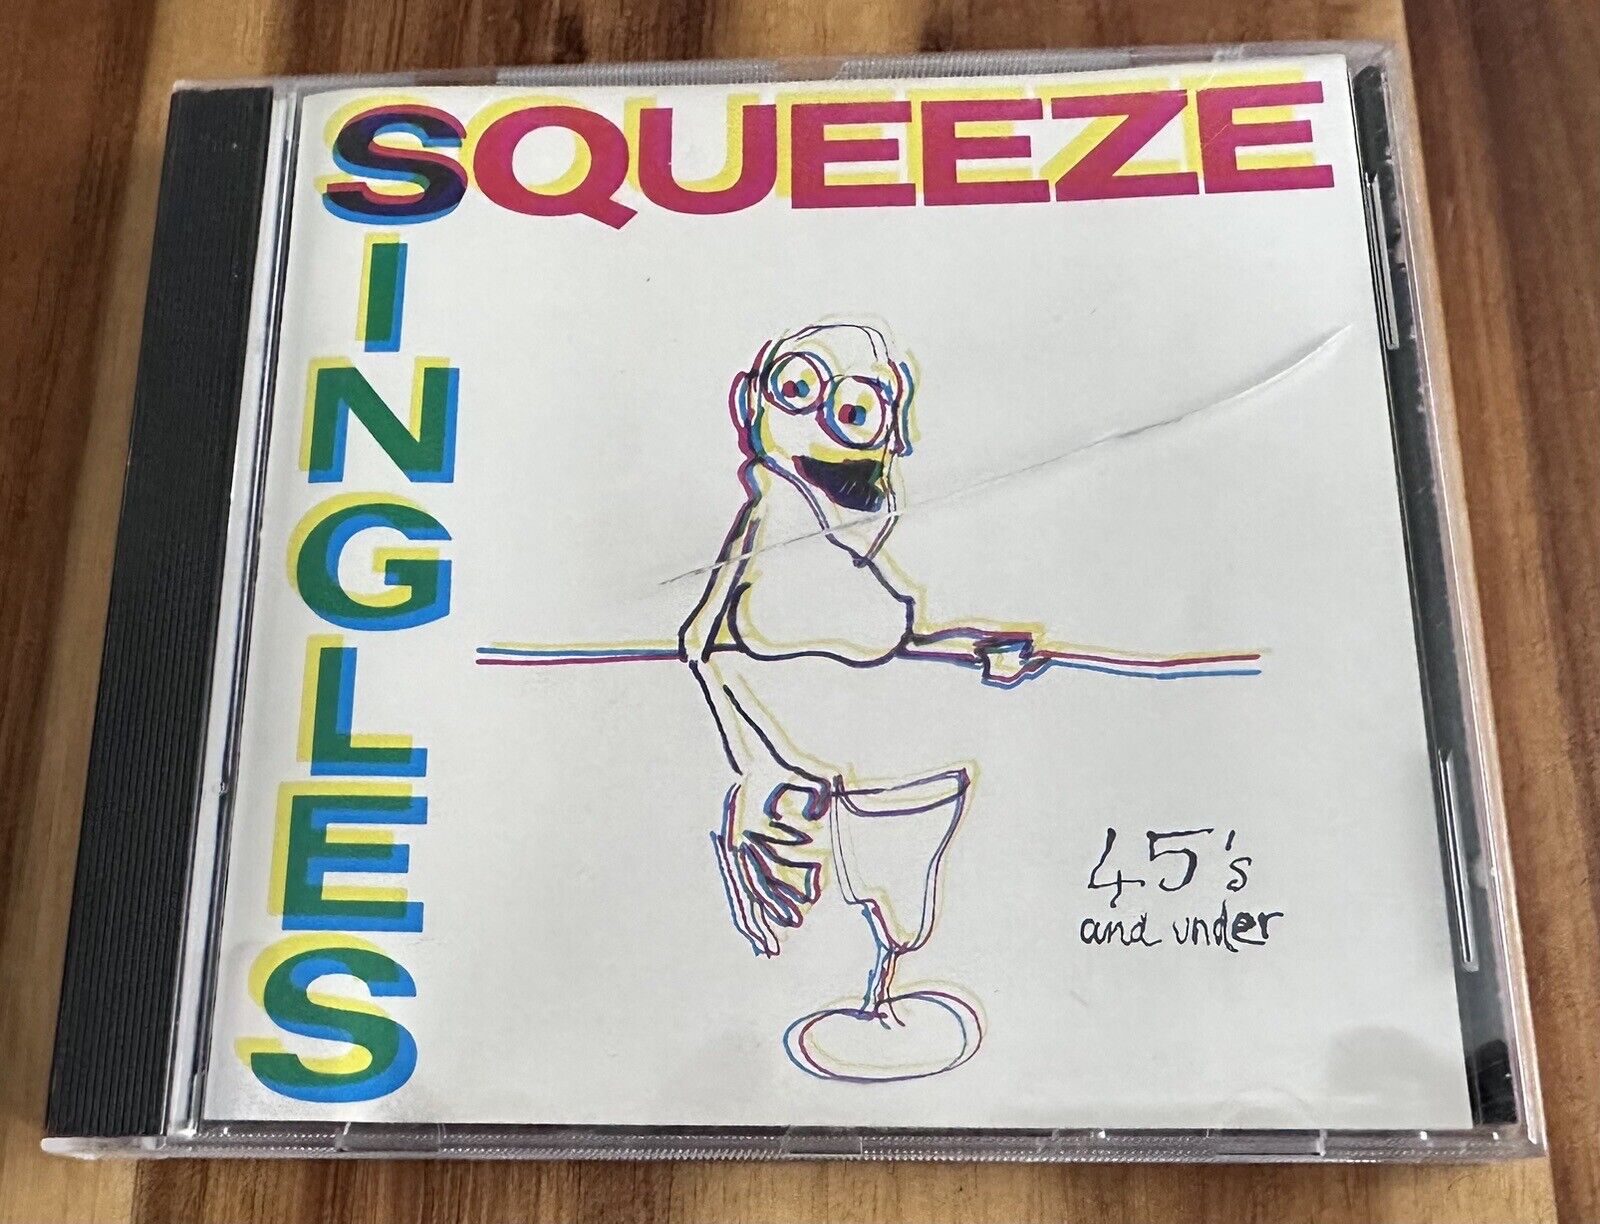 Squeeze Singles - 45’s and Under CD 1982